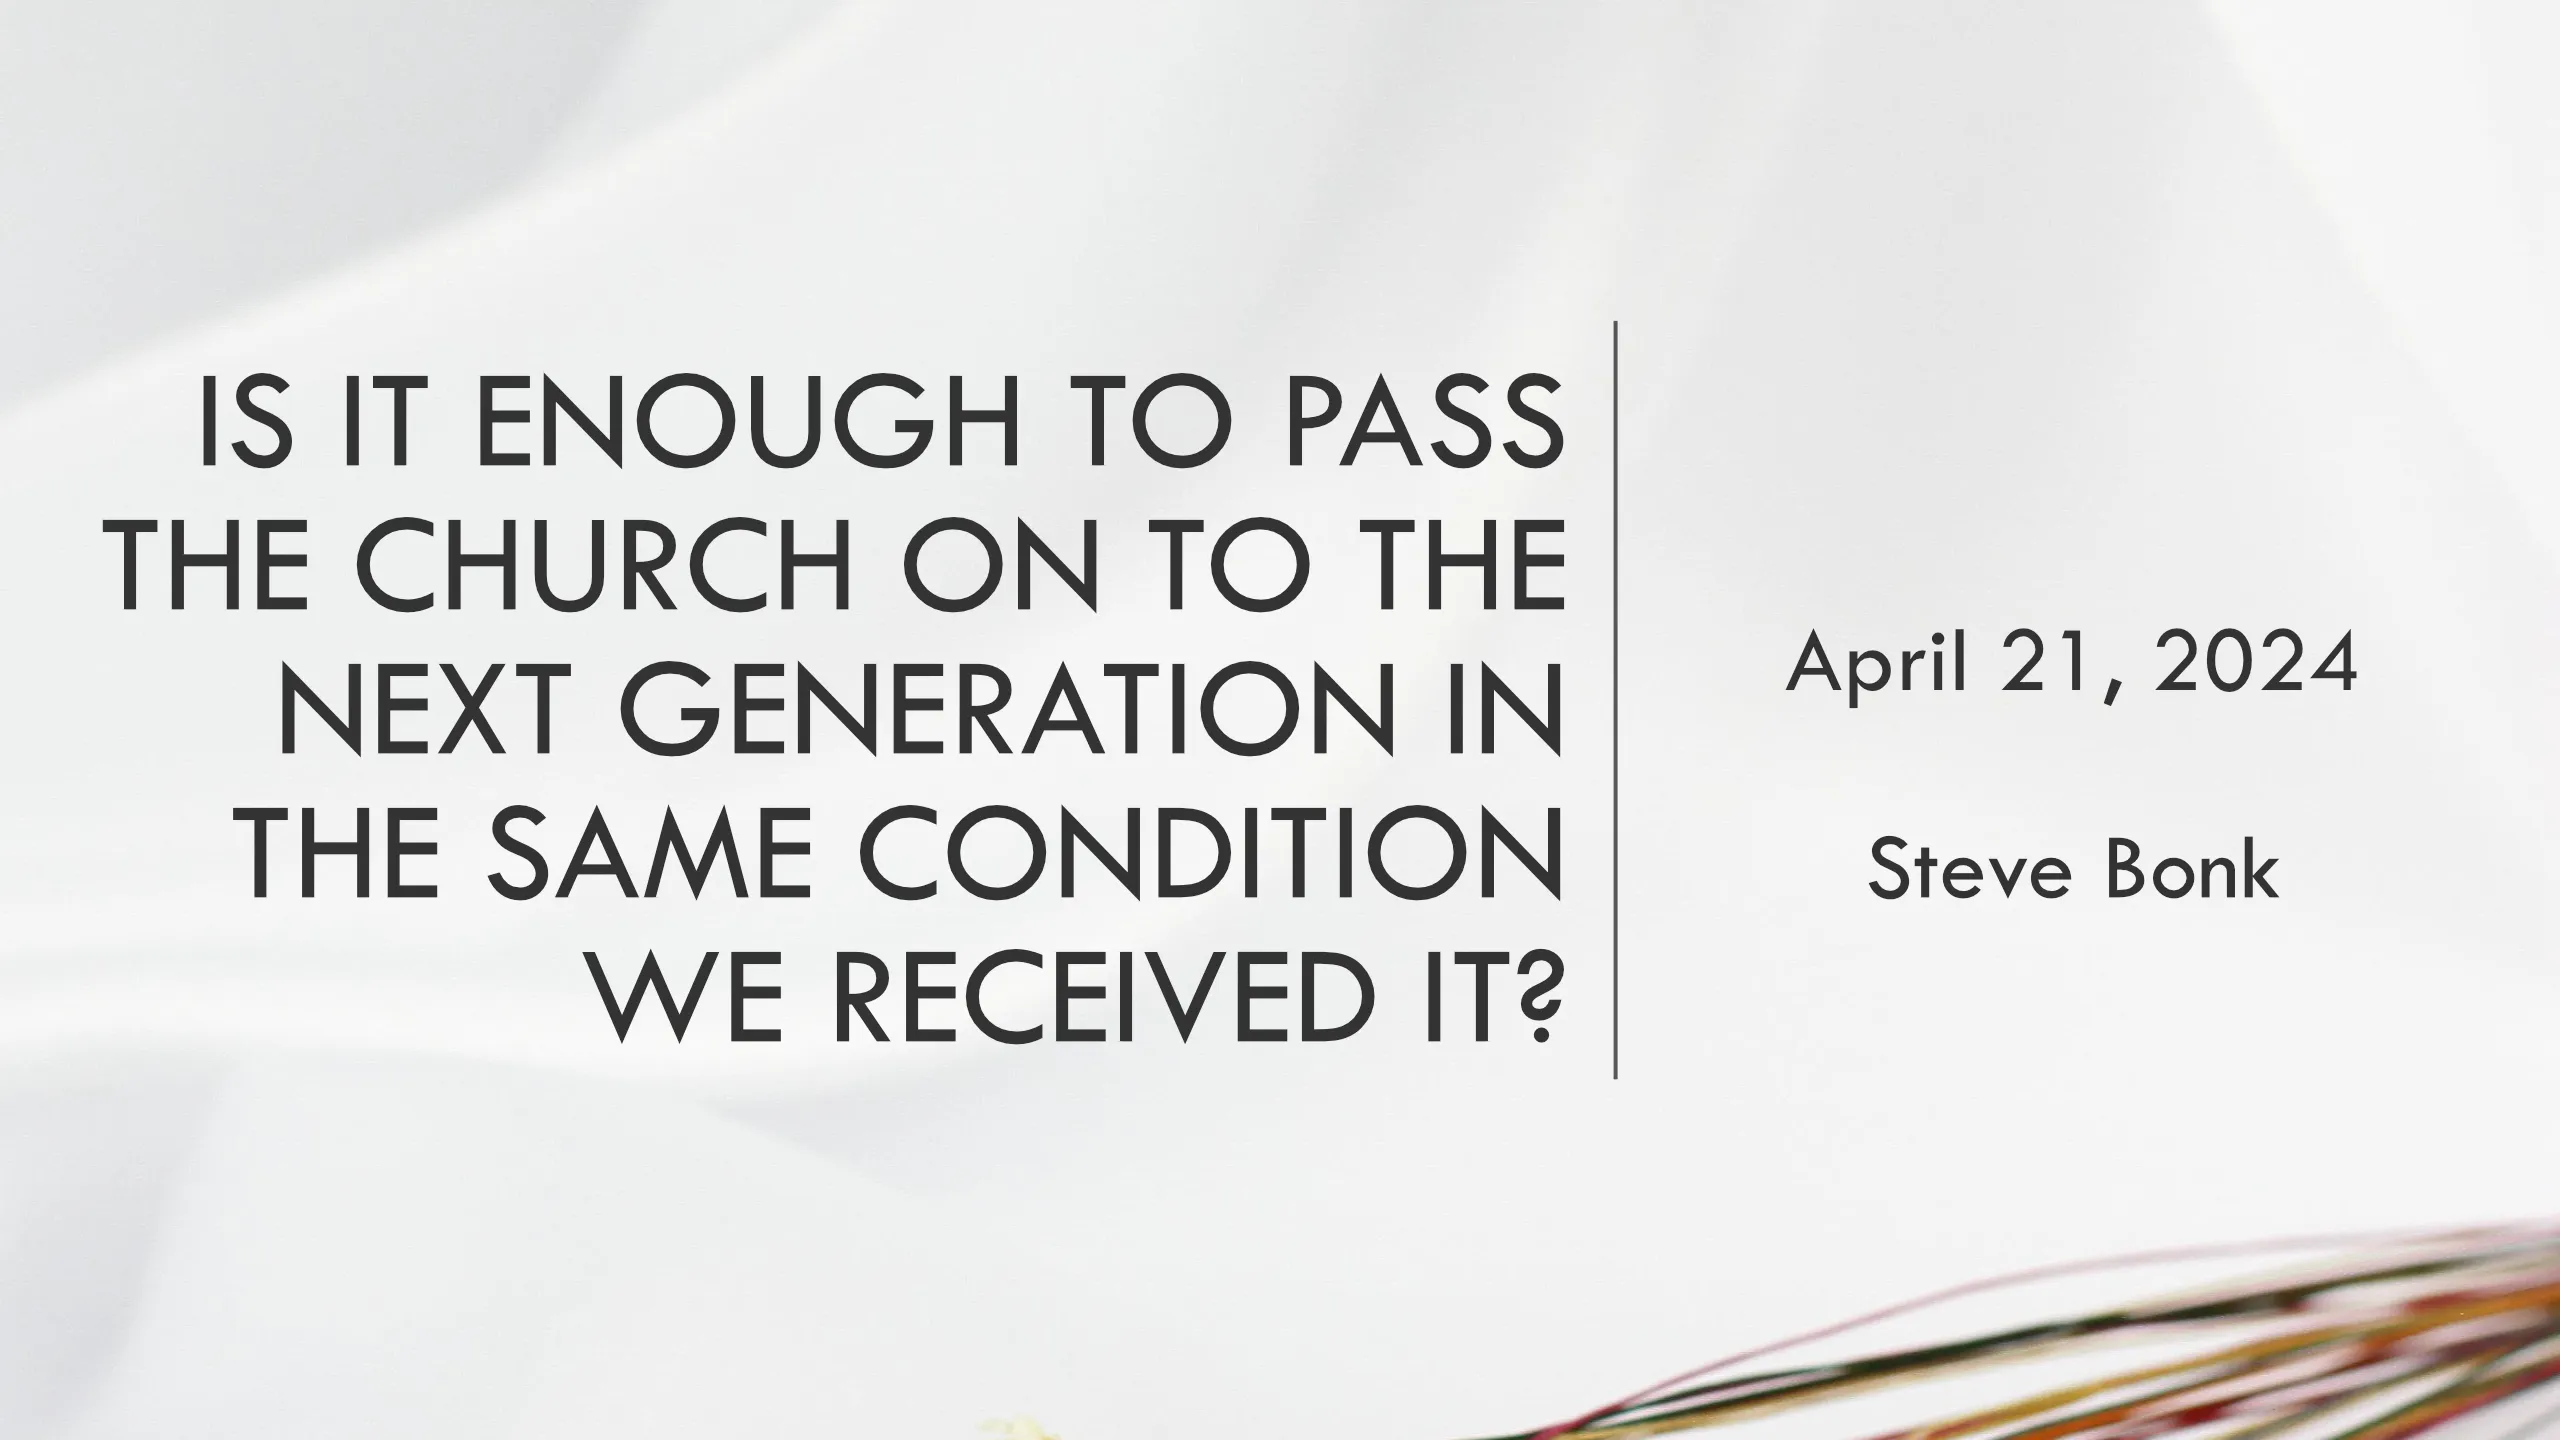 Is it enough to pass the church on to the next generation in the same condition we received it?